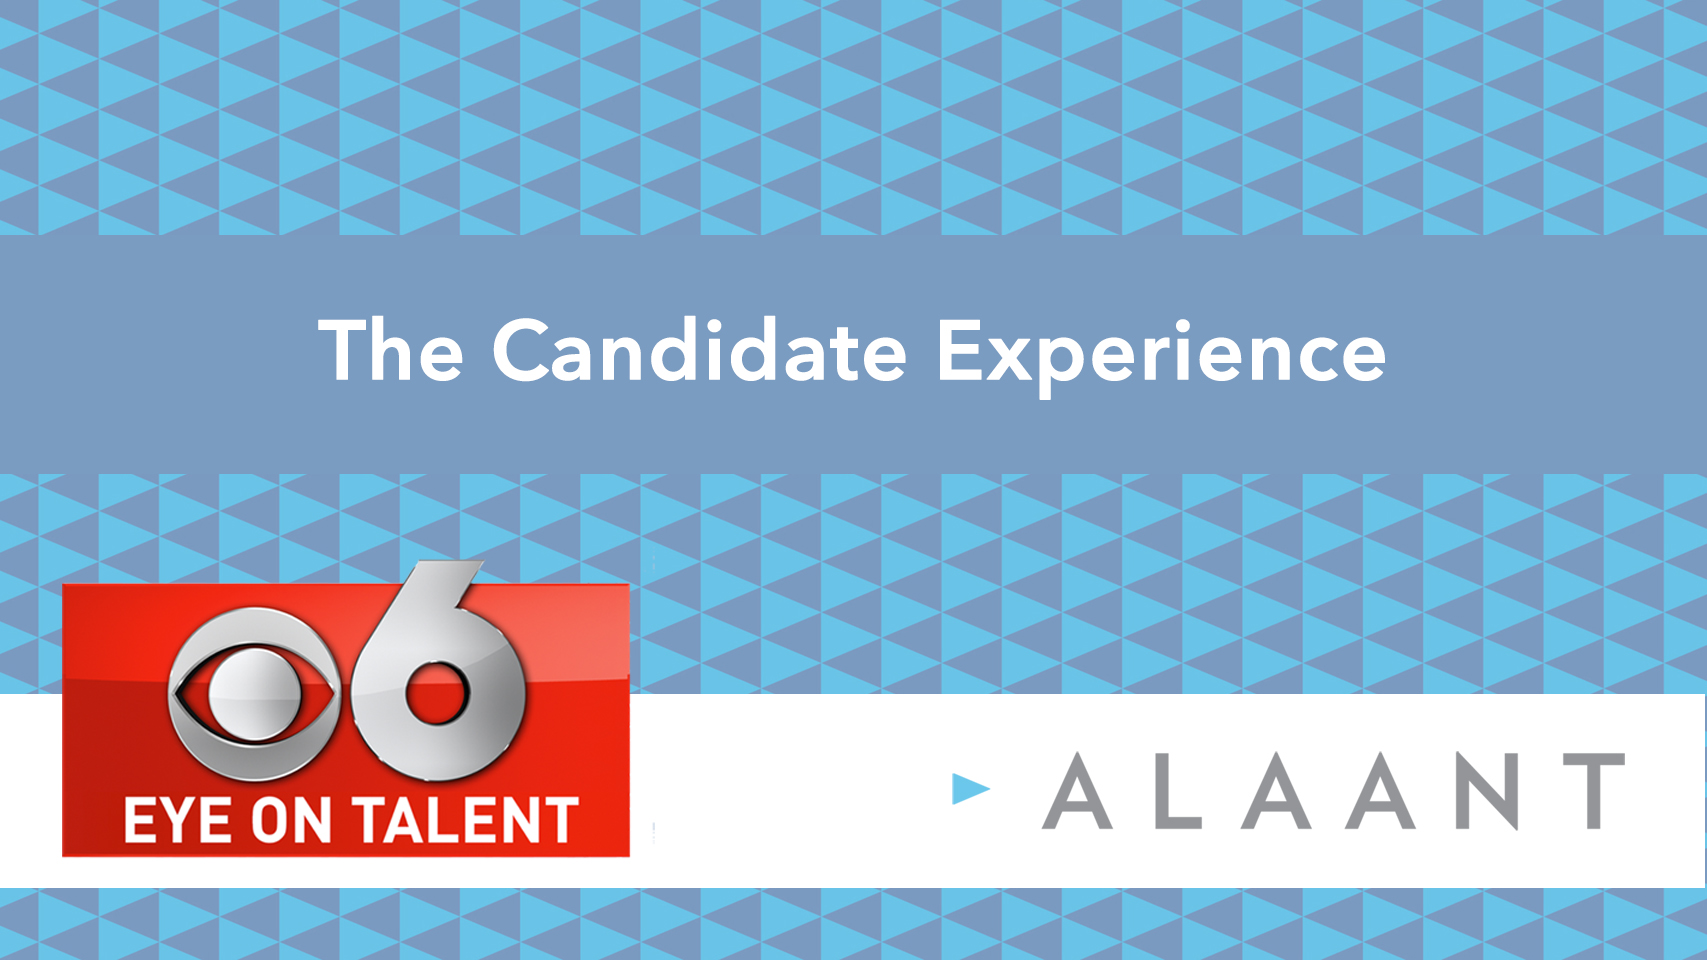 eye on talent alaant candidate experience